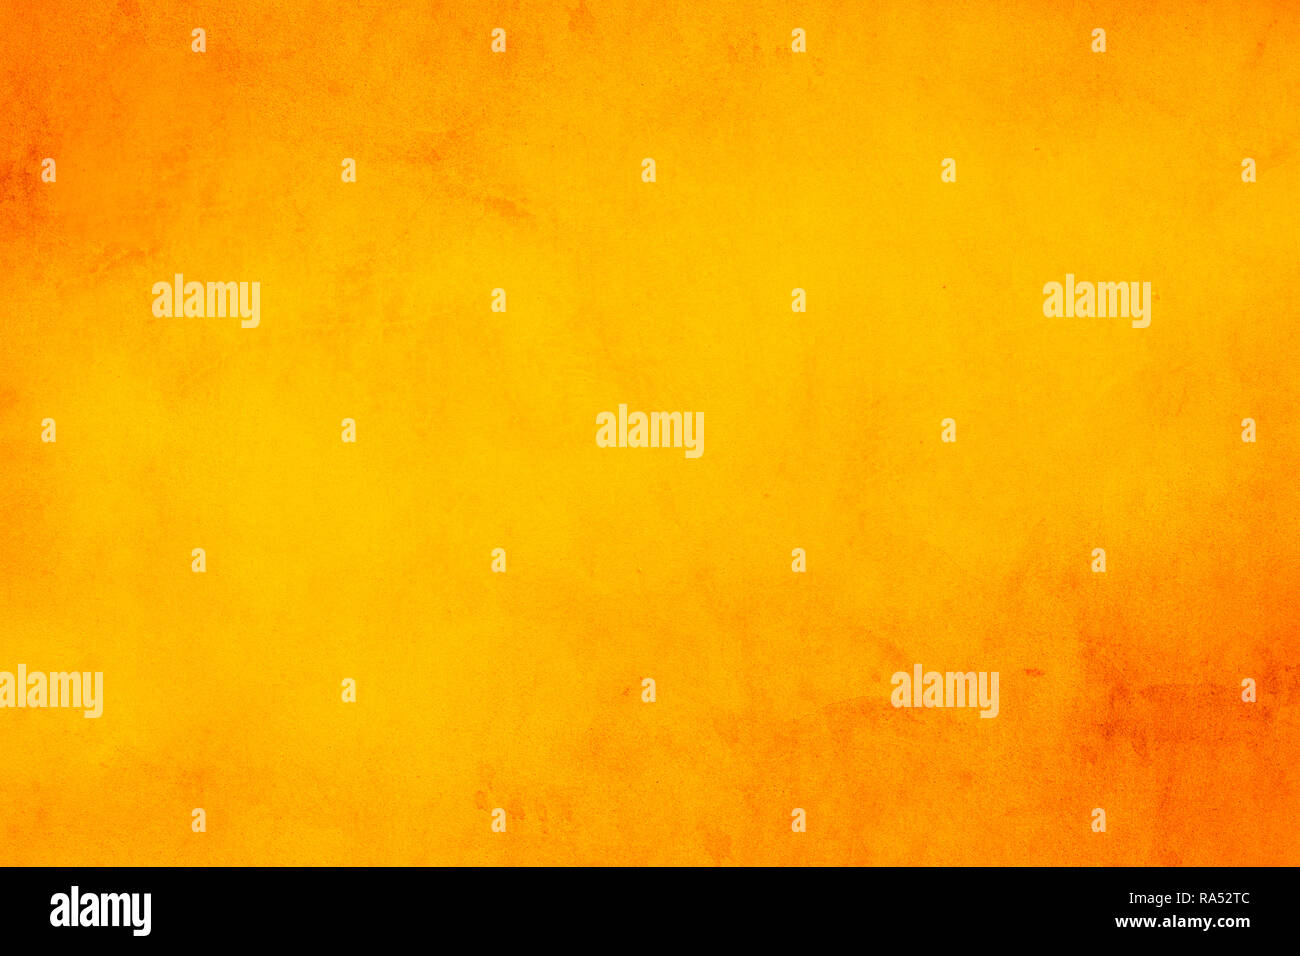 Horizontal yellow and orange grunge texture cement or concrete wall banner,  blank background Stock Photo - Alamy